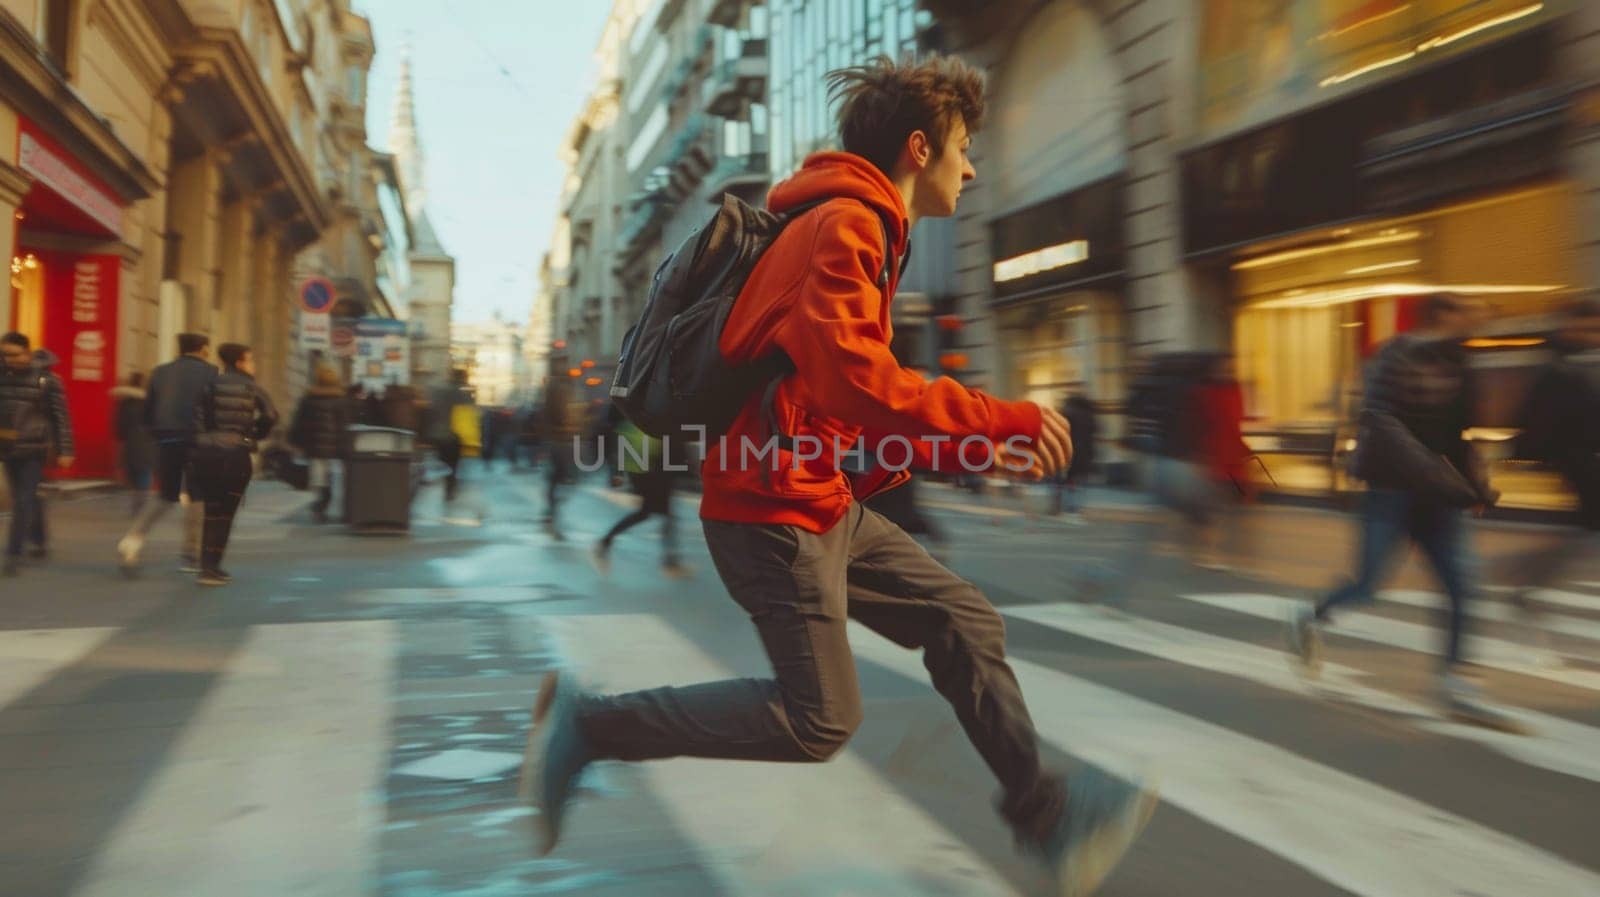 A man in red jacket running down a city street with people walking